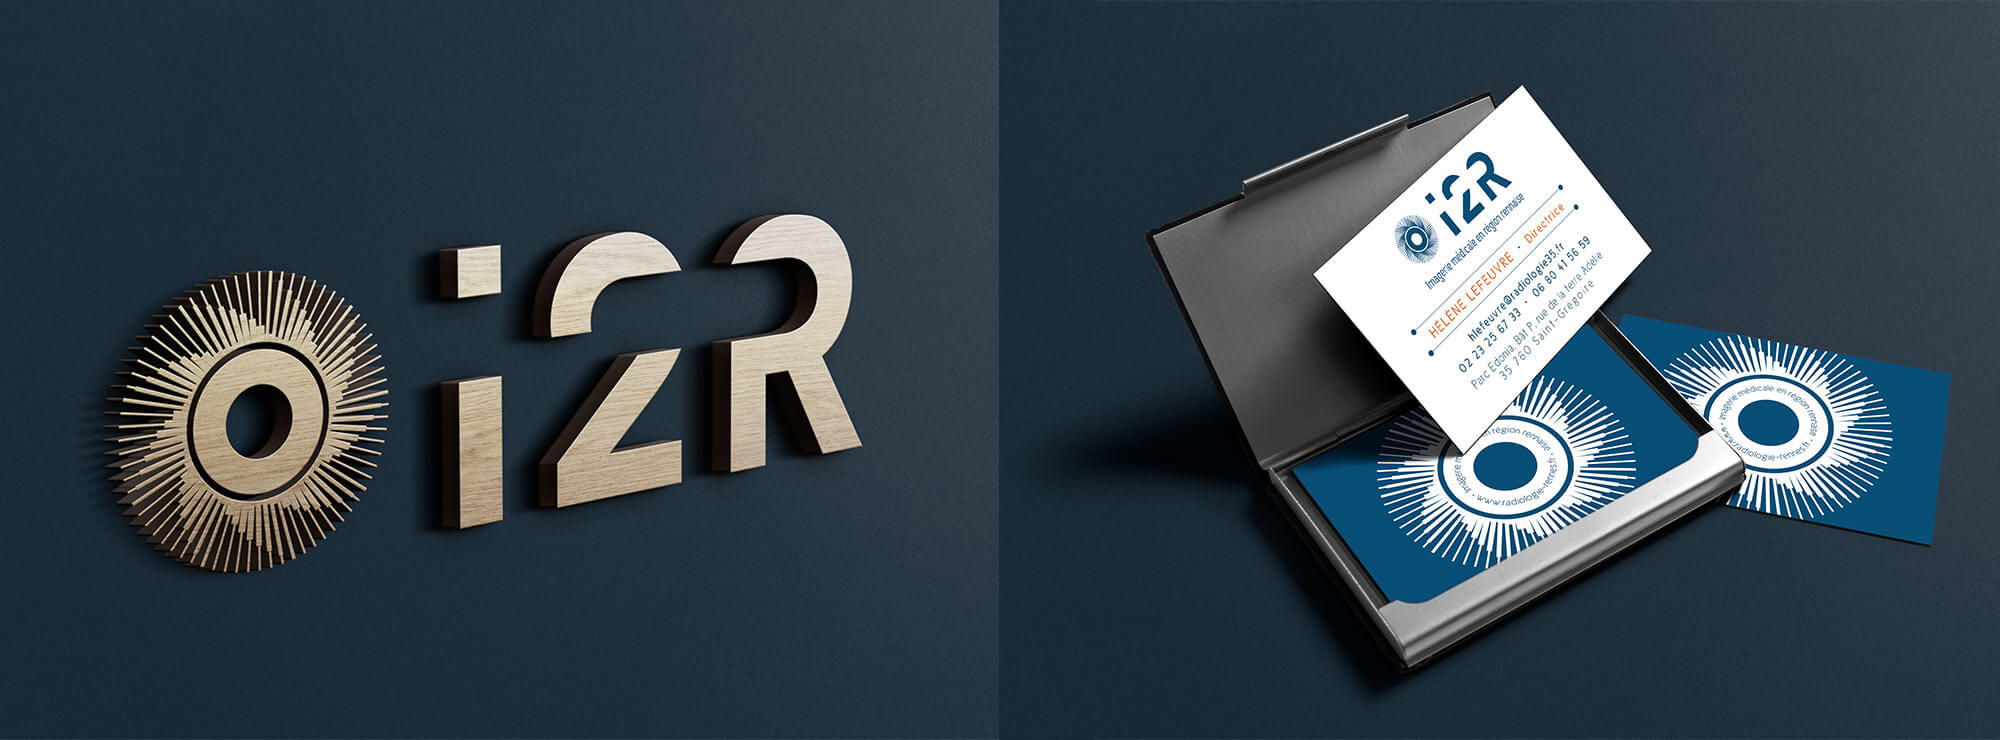 I2R - a visual identity that sees beyond